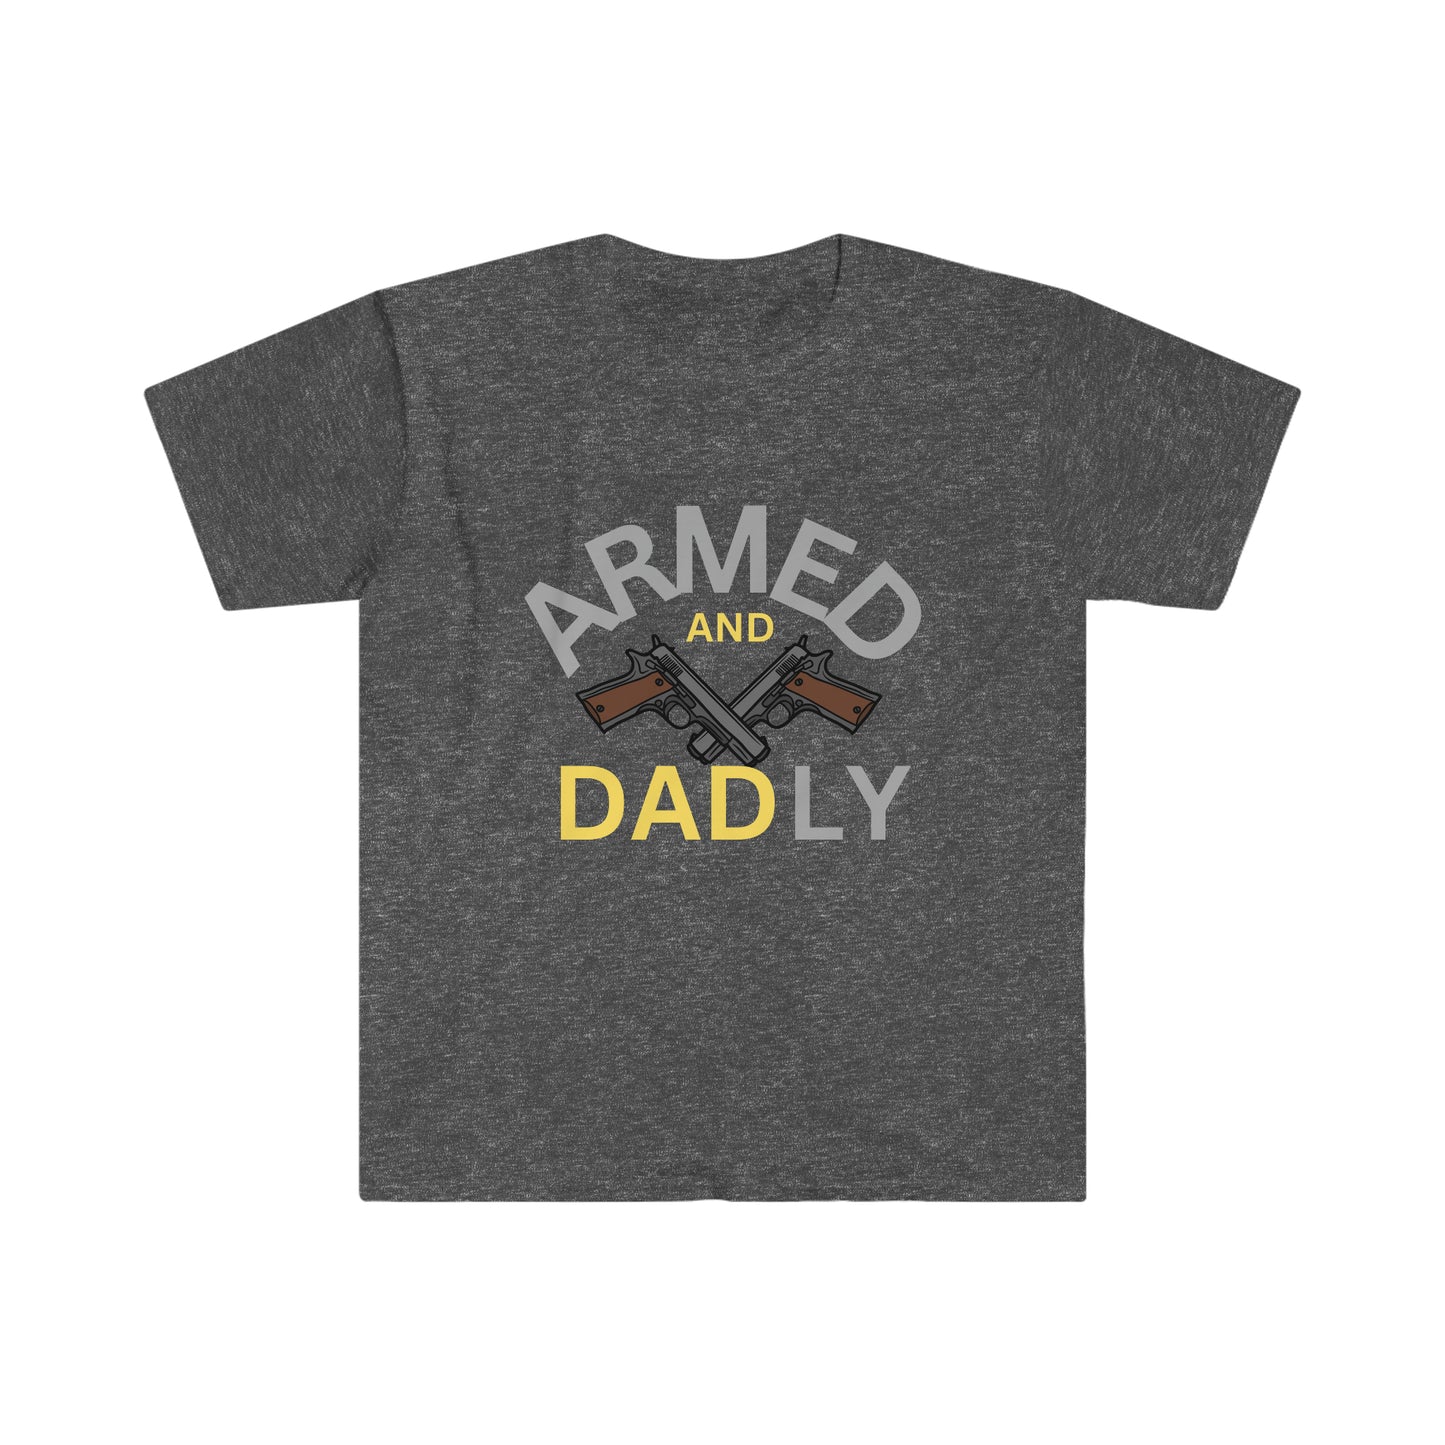 Gift For Dad-"Armed and Dadly T- shirt